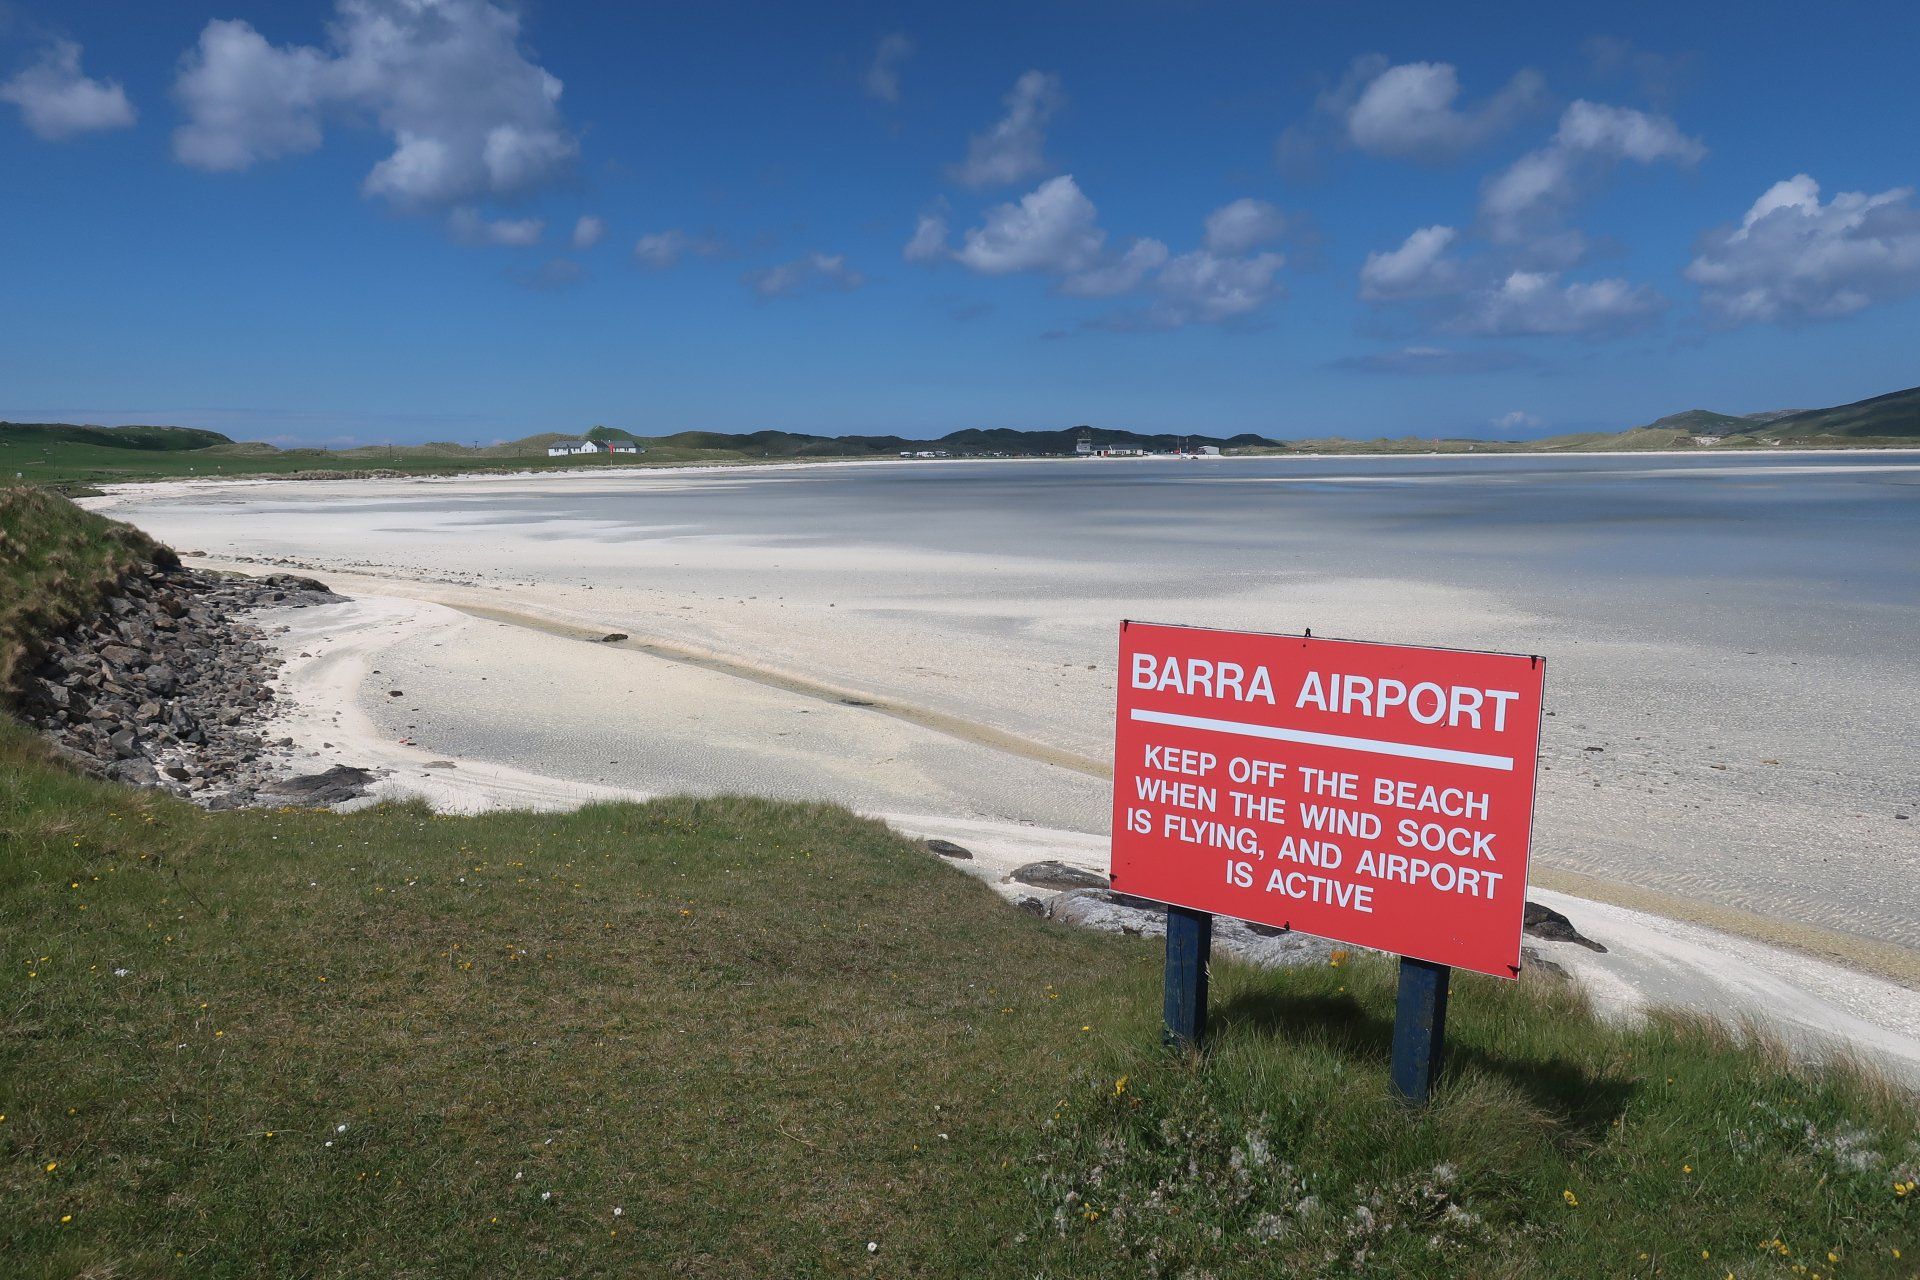 Picture of Barra Airport, which is a beach. Red sign warns to keep of beach when windsock is flying